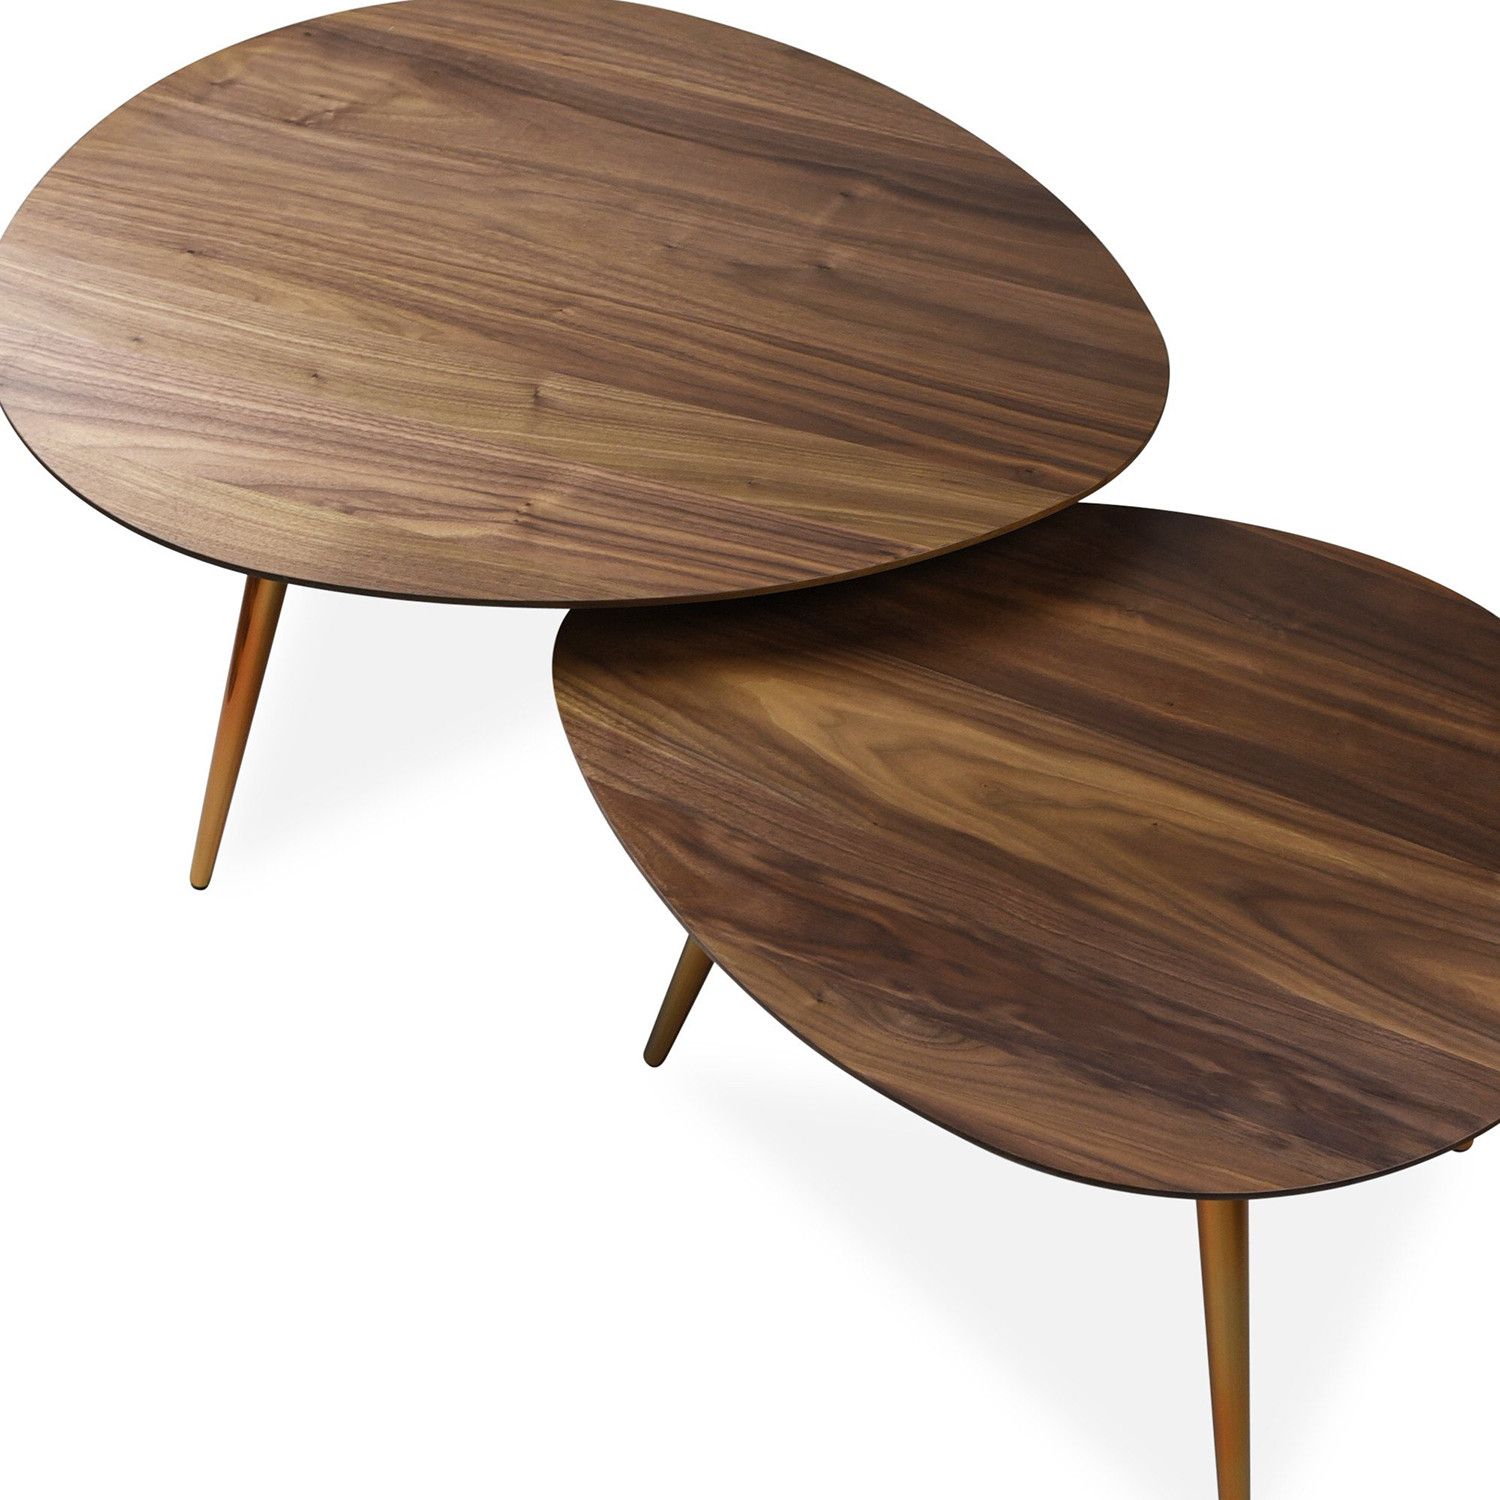 Maddox Mid Century Modern Nesting Coffee Table Set – Edloe Finch With Regard To Mid Century Modern Coffee Tables (View 15 of 15)